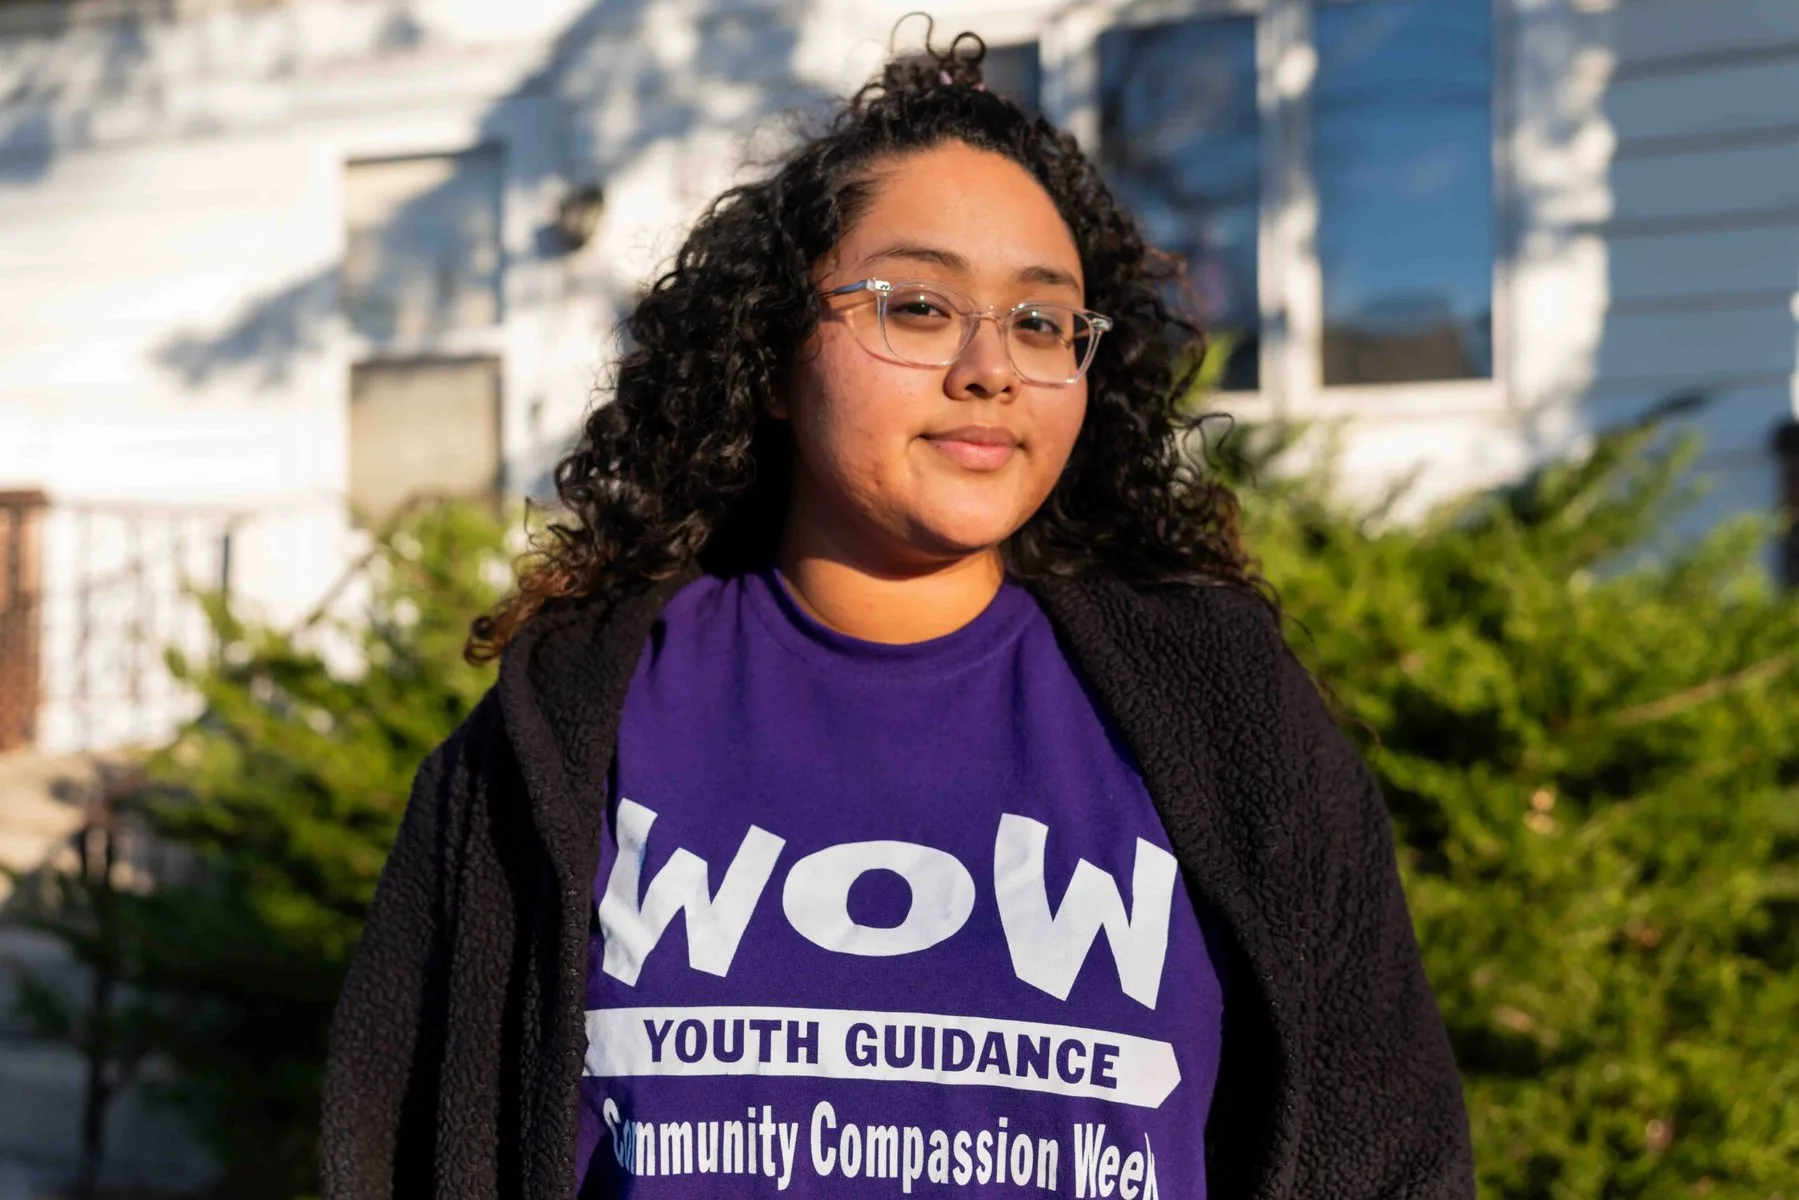 Yuli Paez-Naranjo, the Working on Womanhood counselor based at Robert Abbott Middle School in Waukegan, Illinois, said she’s seen a decrease in anger and fights among the girls participating in the mental health support program.